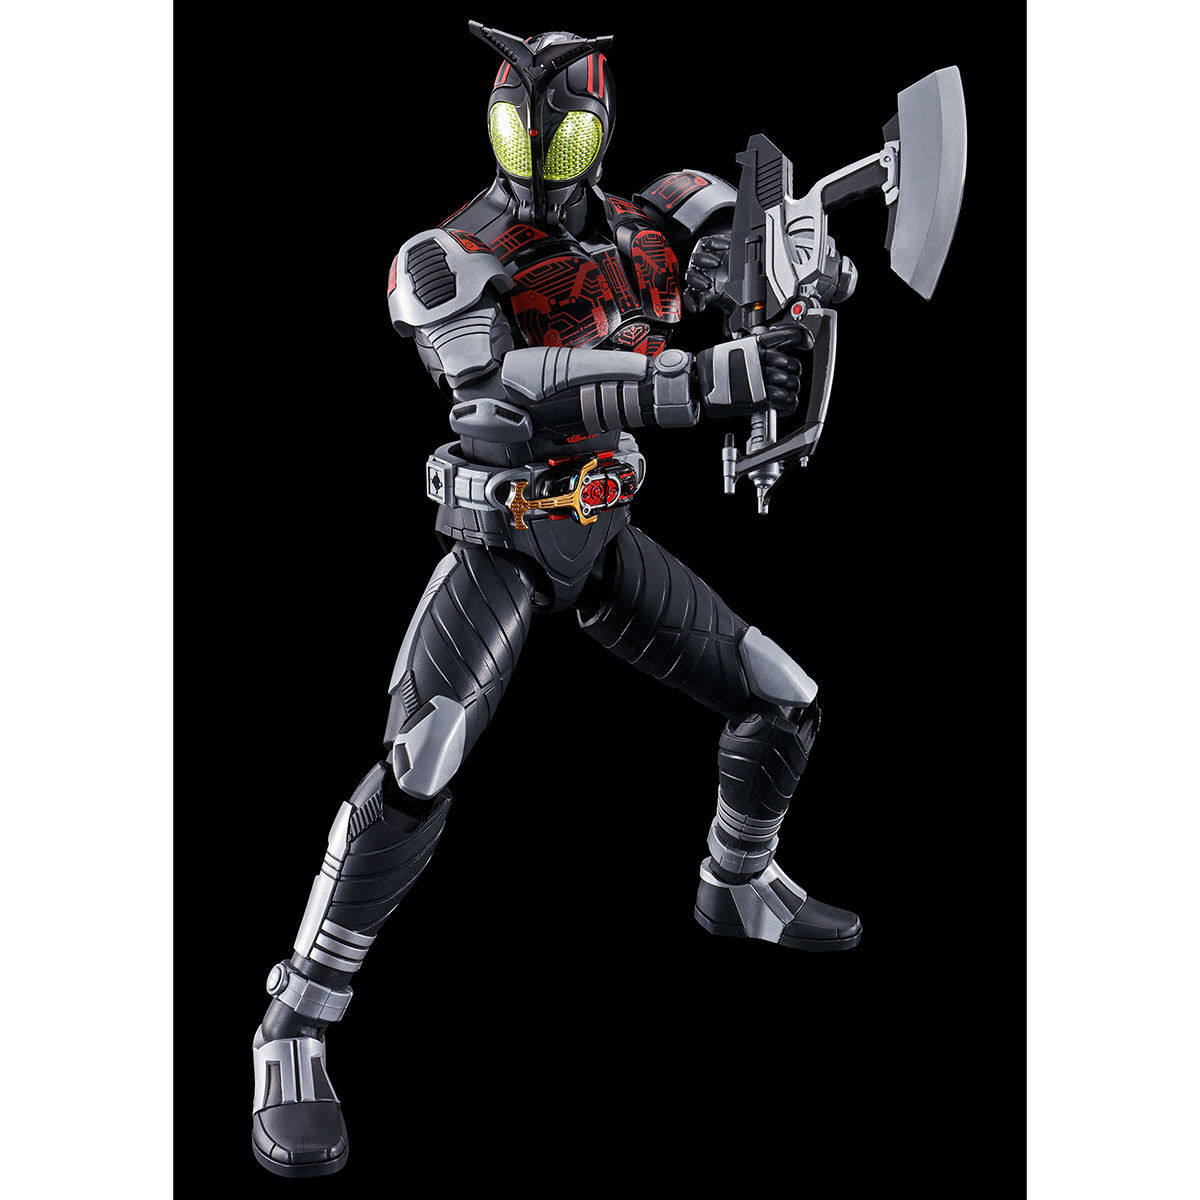 #KamenRider Fans, Get Ready! Figure-rise Standard MASKED RIDER DARK KABUTO will be Available for Pre-Order Tomorrow, June 14 at 9:00 PM (EDT) on Premium Bandai USA!!

- Figure-rise Standard MASKED RIDER DARK KABUTO

ow.ly/BTq350ONrEg
Don't Miss Out!